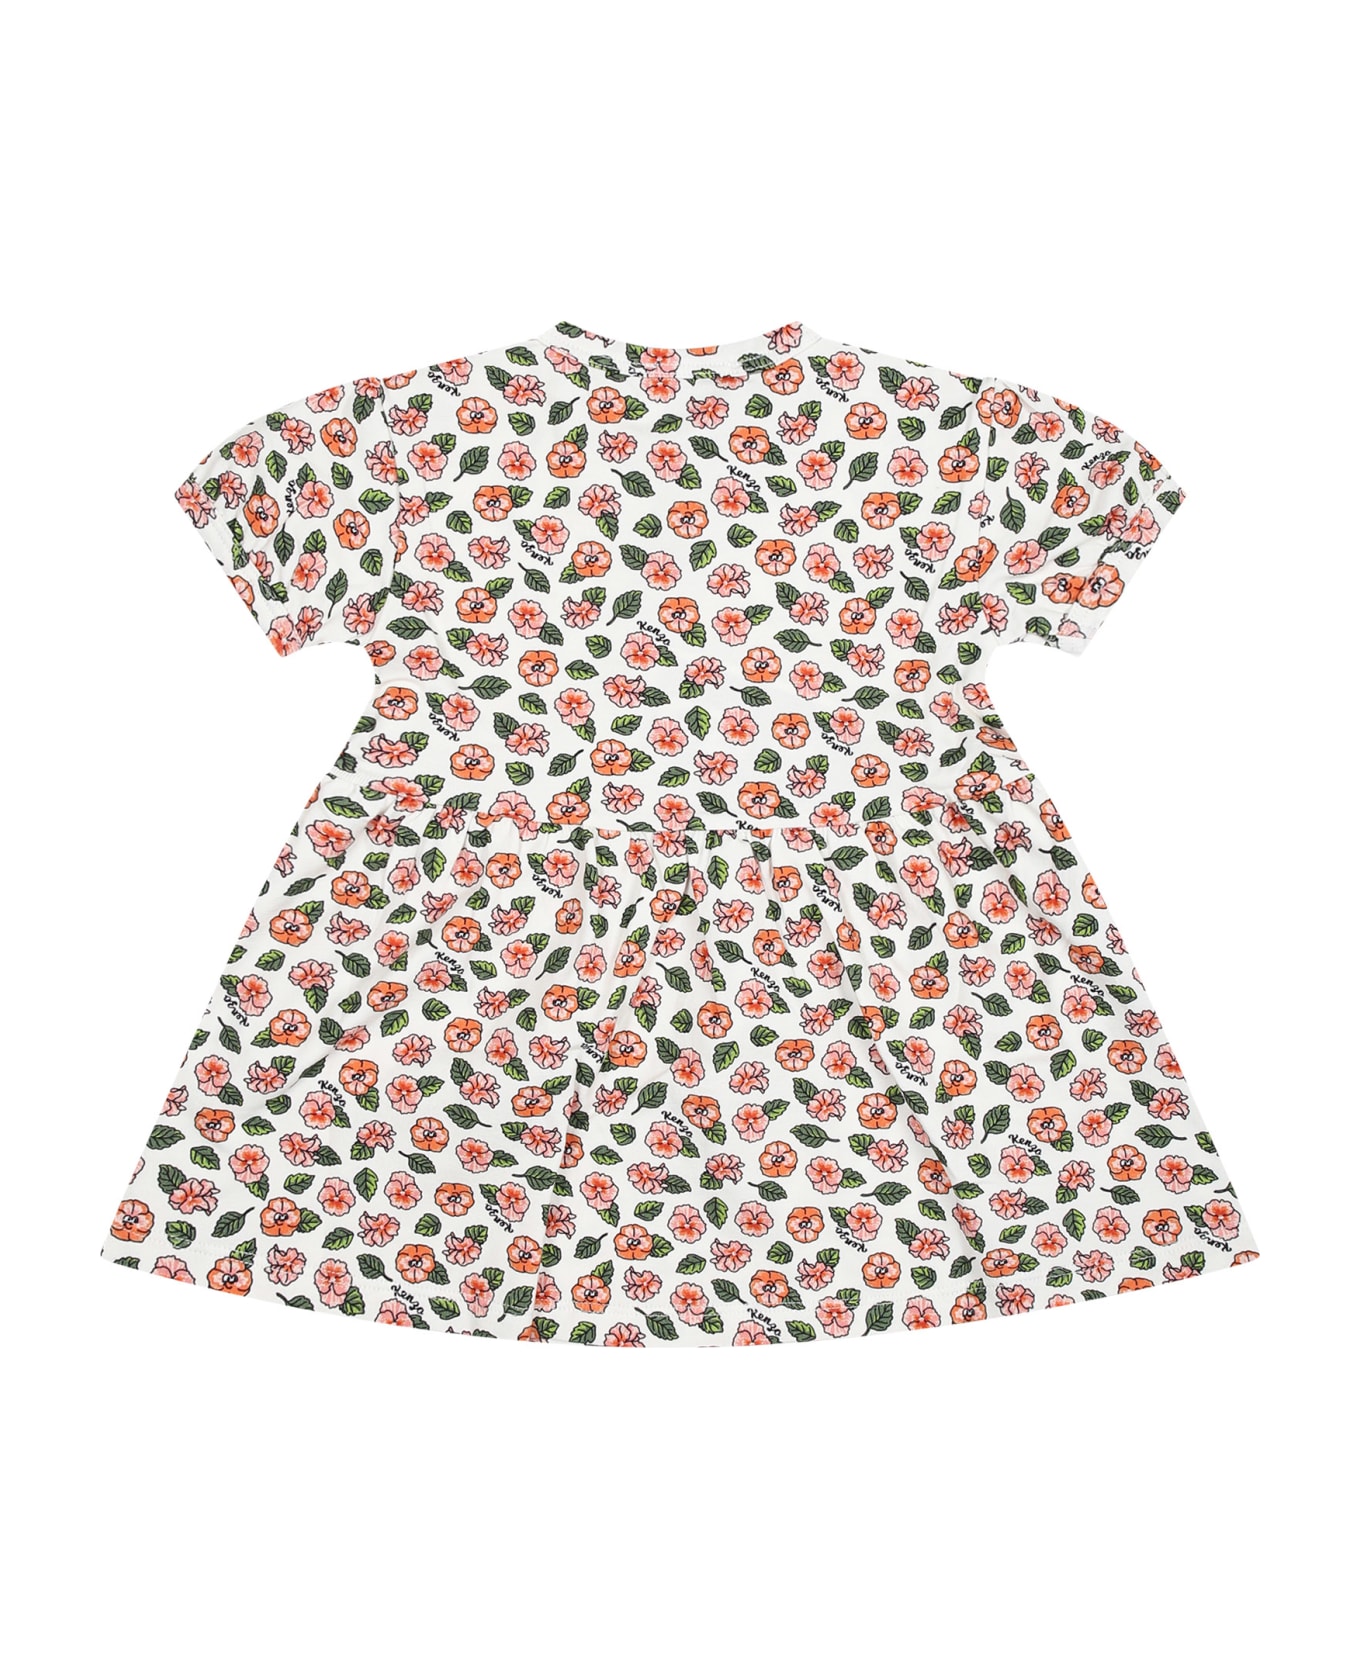 Kenzo Kids White Dress For Baby With Floral Print - White